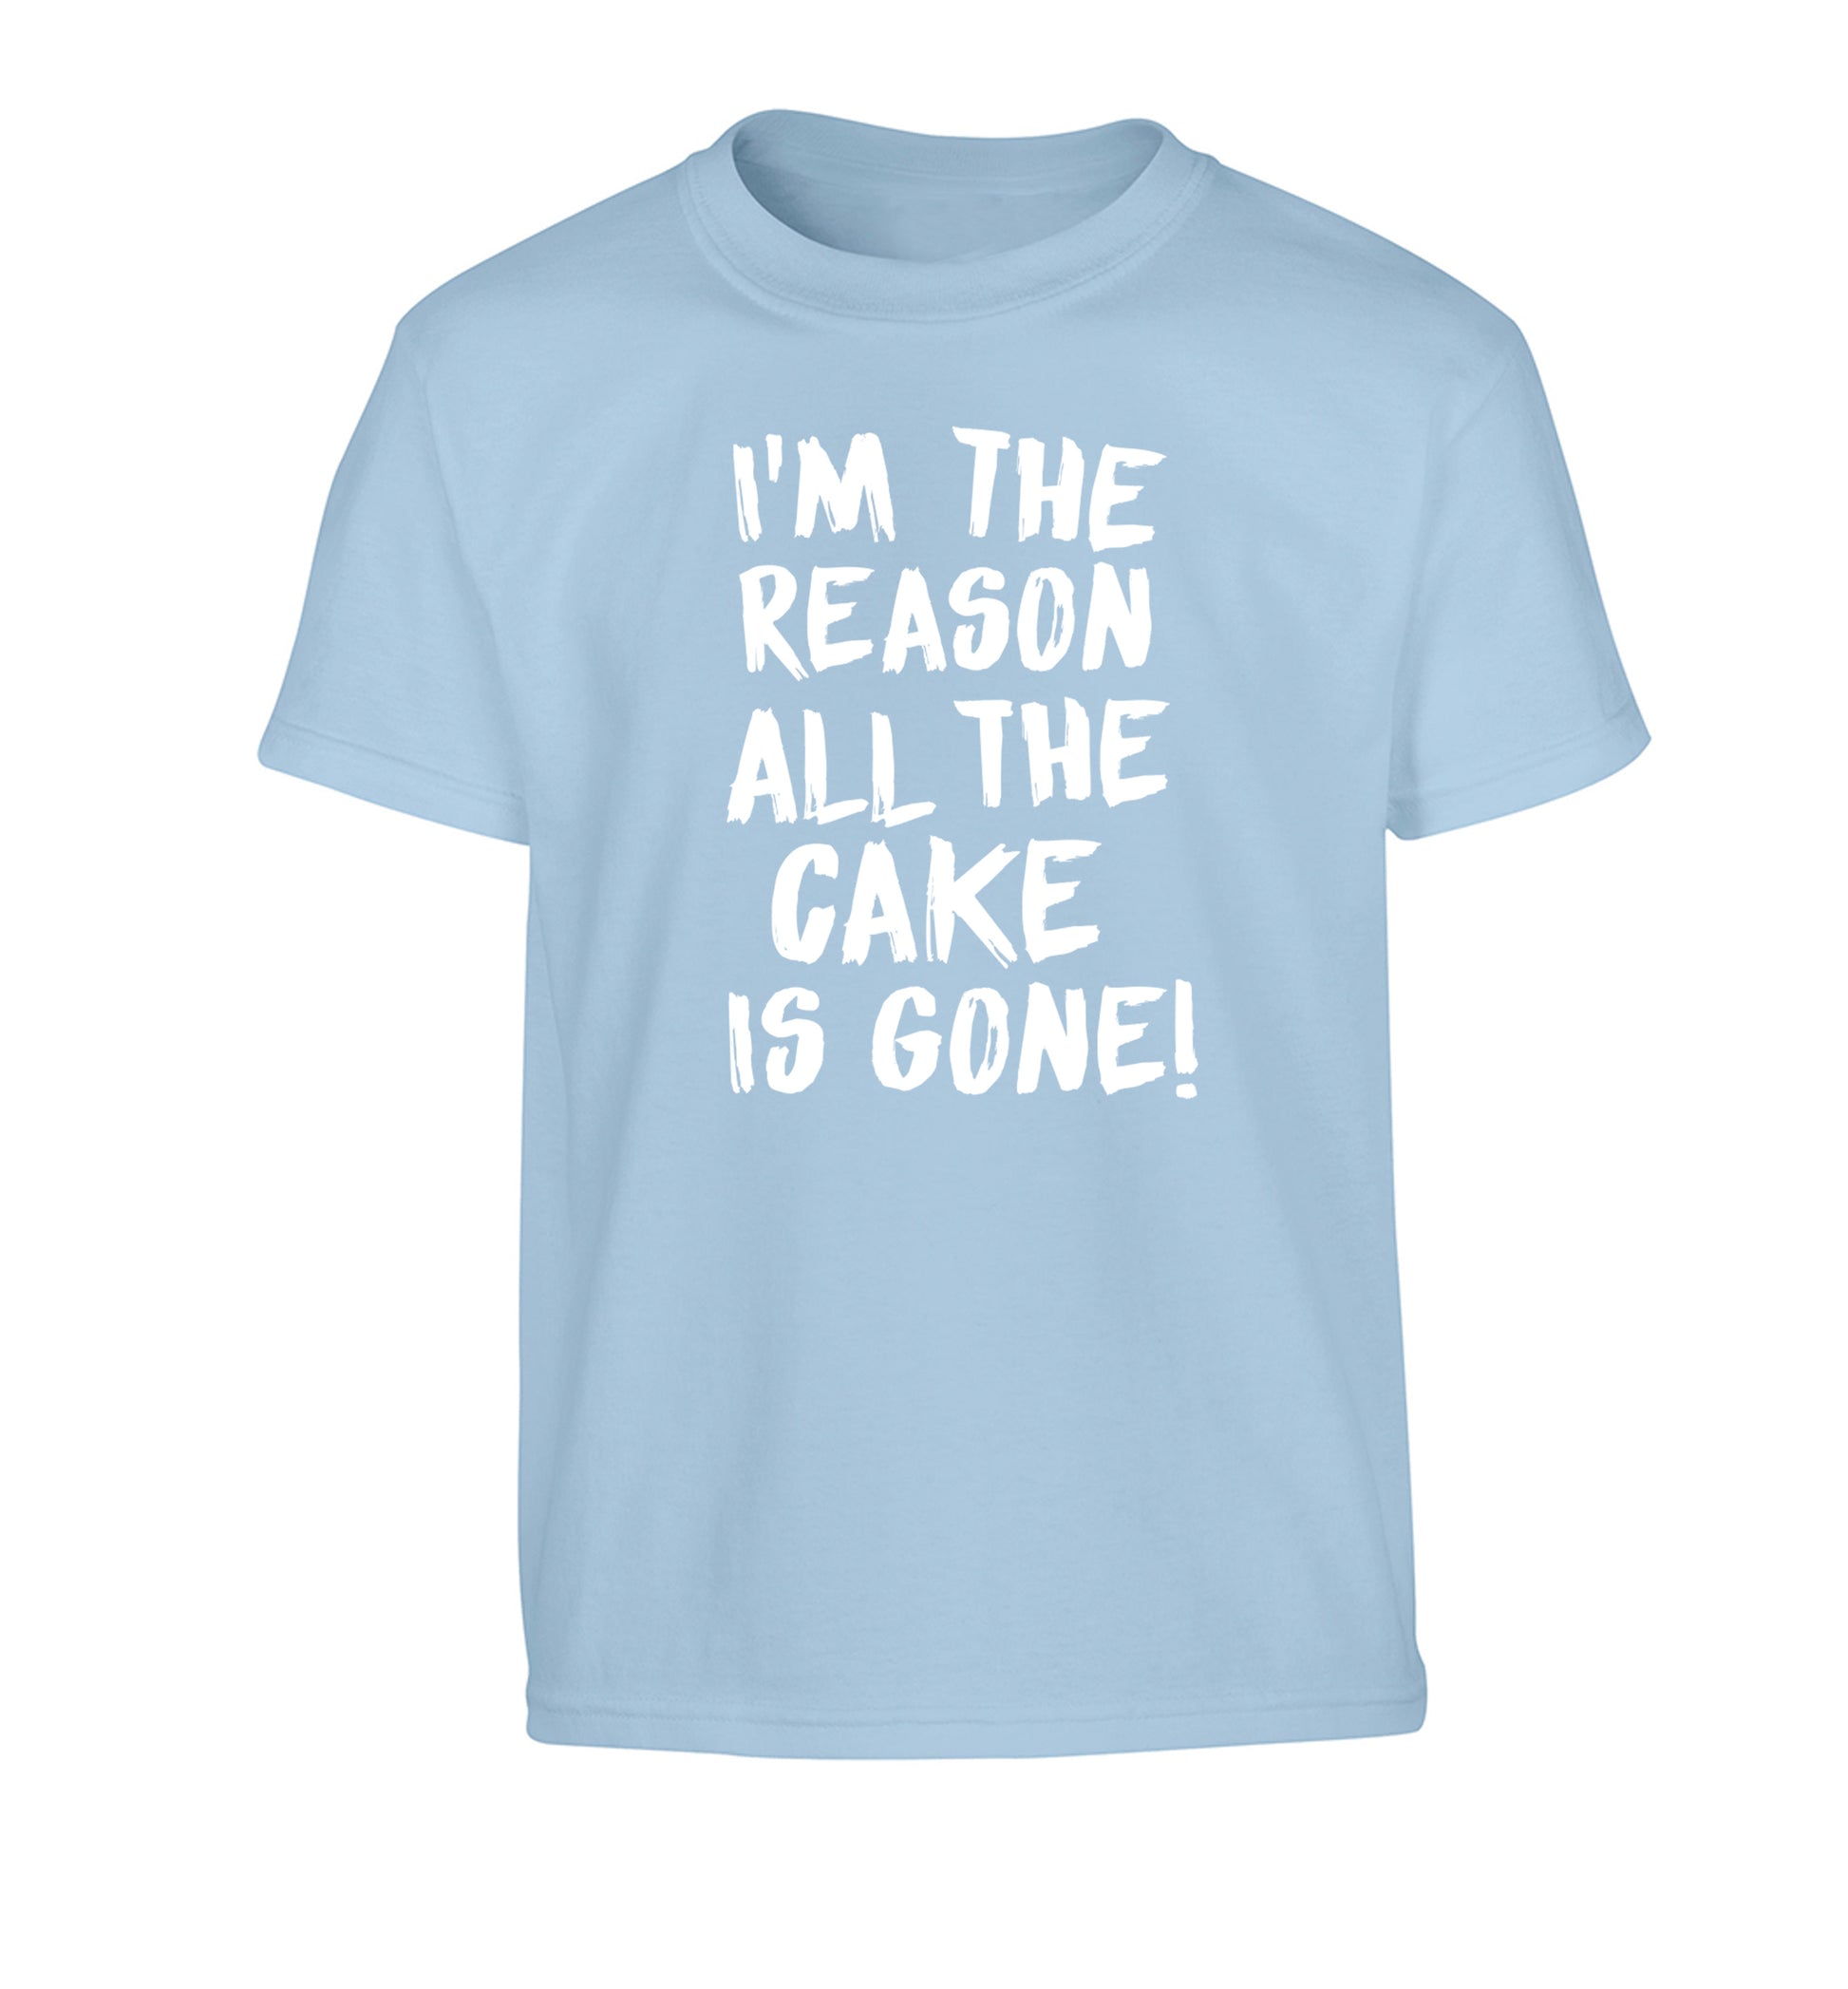 I'm the reason all the cake is gone Children's light blue Tshirt 12-13 Years